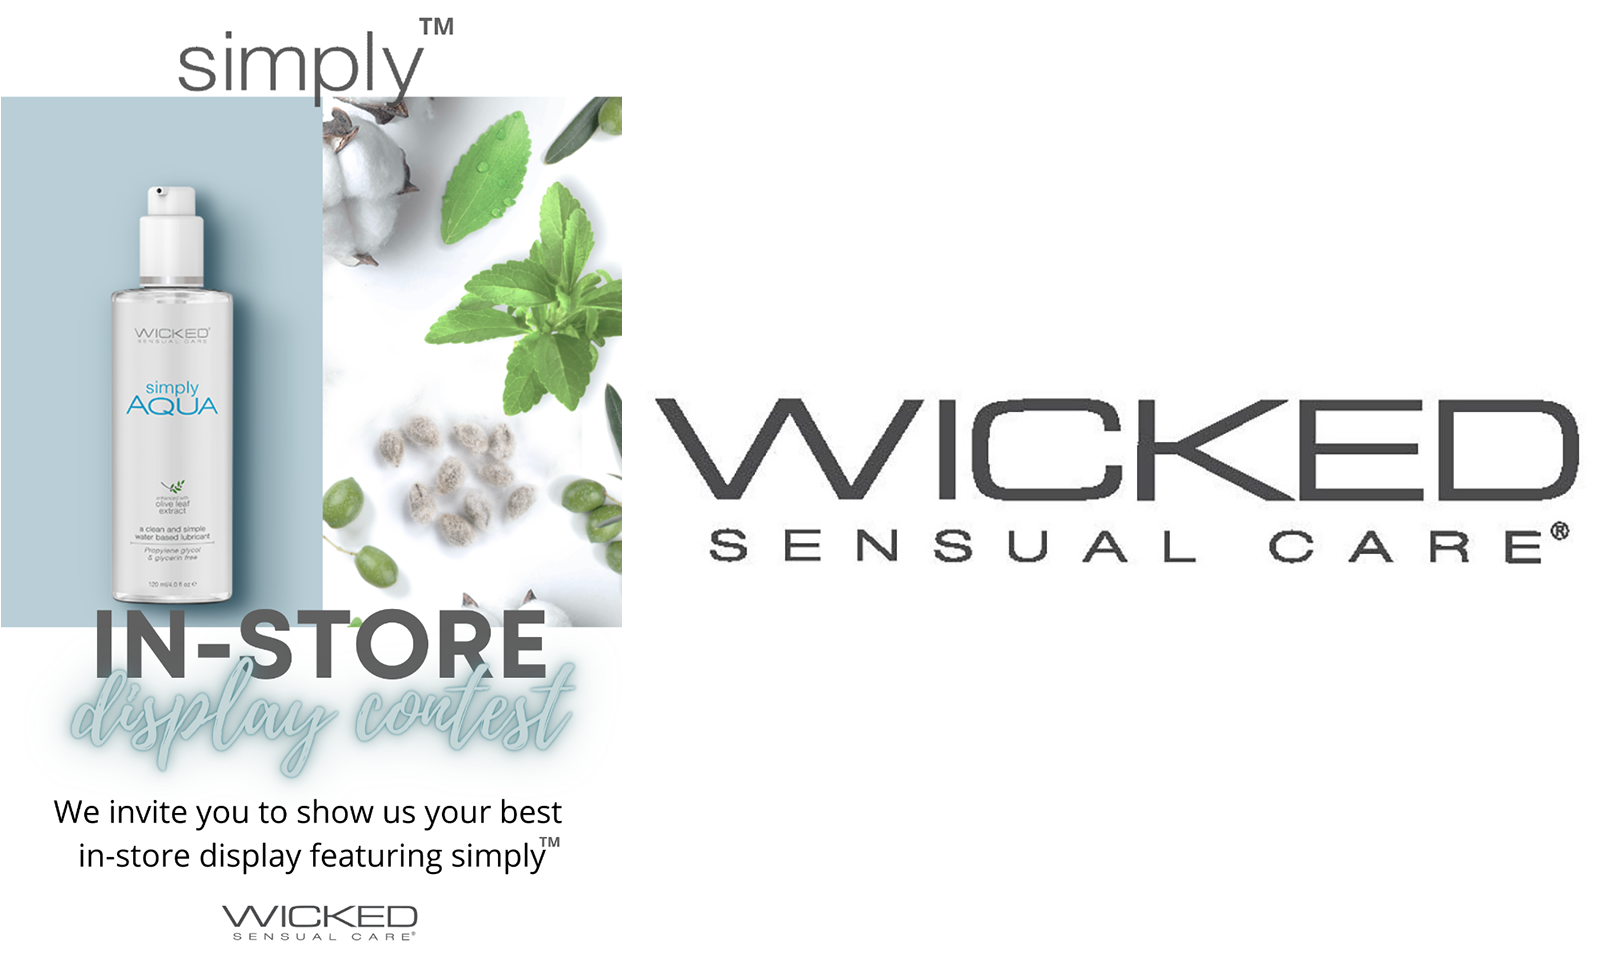 Wicked Sensual Care Launches Simply In-Store Display Contest